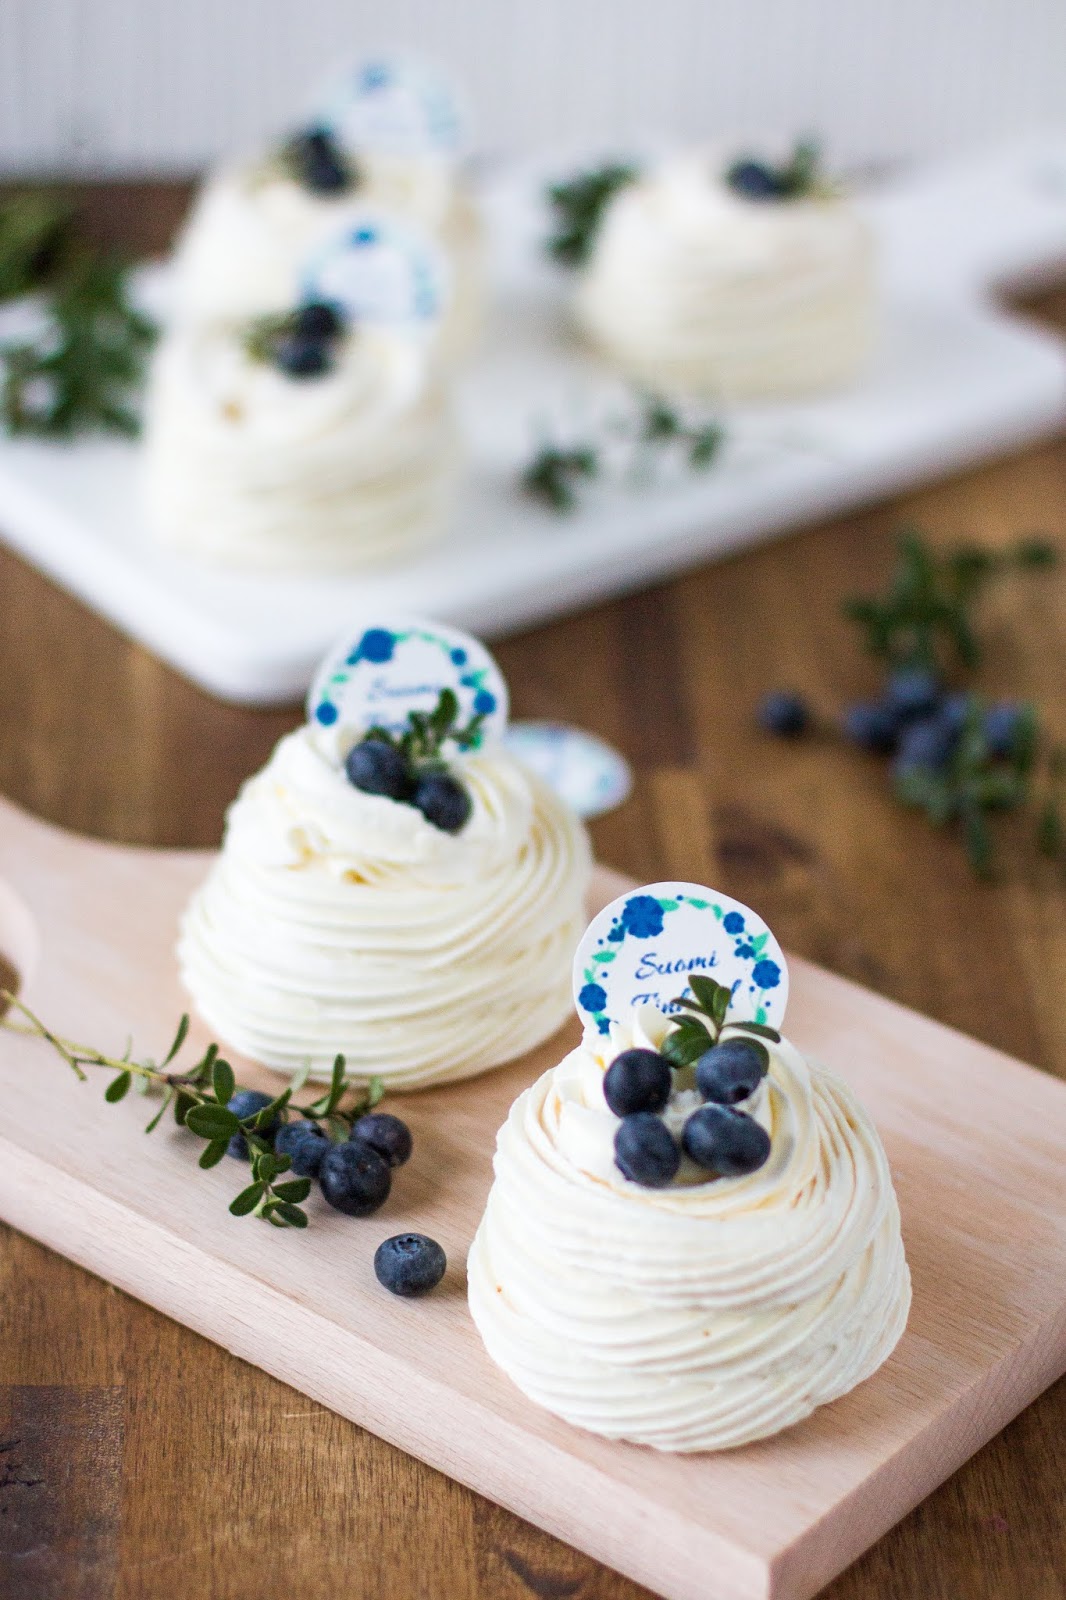 Meringue with whipped cream and blueberries